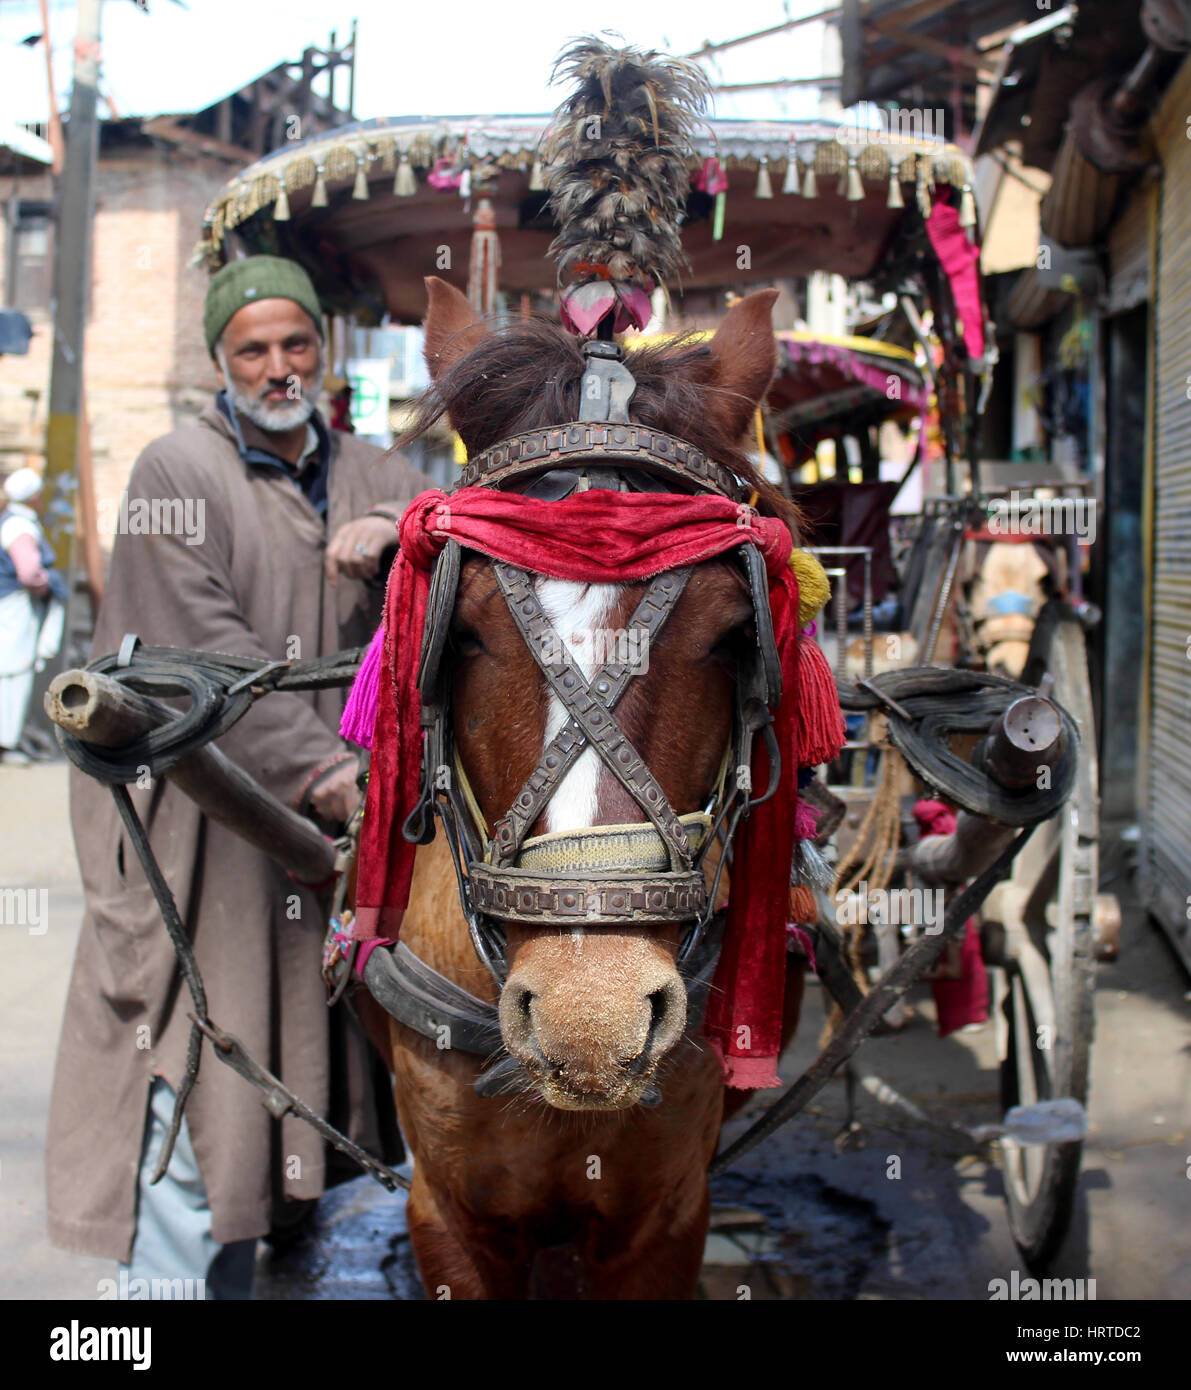 A Tonga or tanga is a light carriage or curricle drawn by horse used for transportation in Indian occupied Kashmir. They have a canopy over the carriage with a single pair of large wheels.The passangers reach the seats from the rear while the driver sits in front of the carriage.Some space is availabe for baggage. This is often used to carry hay for the horses.Tanga were popular before the advent of automobiles and are still in use in some parts of Indian occupied Kashmir.Hence Tonga became culture of kashmir.The culture of the Tanga is disappearing due to the speed of modern transportation an Stock Photo